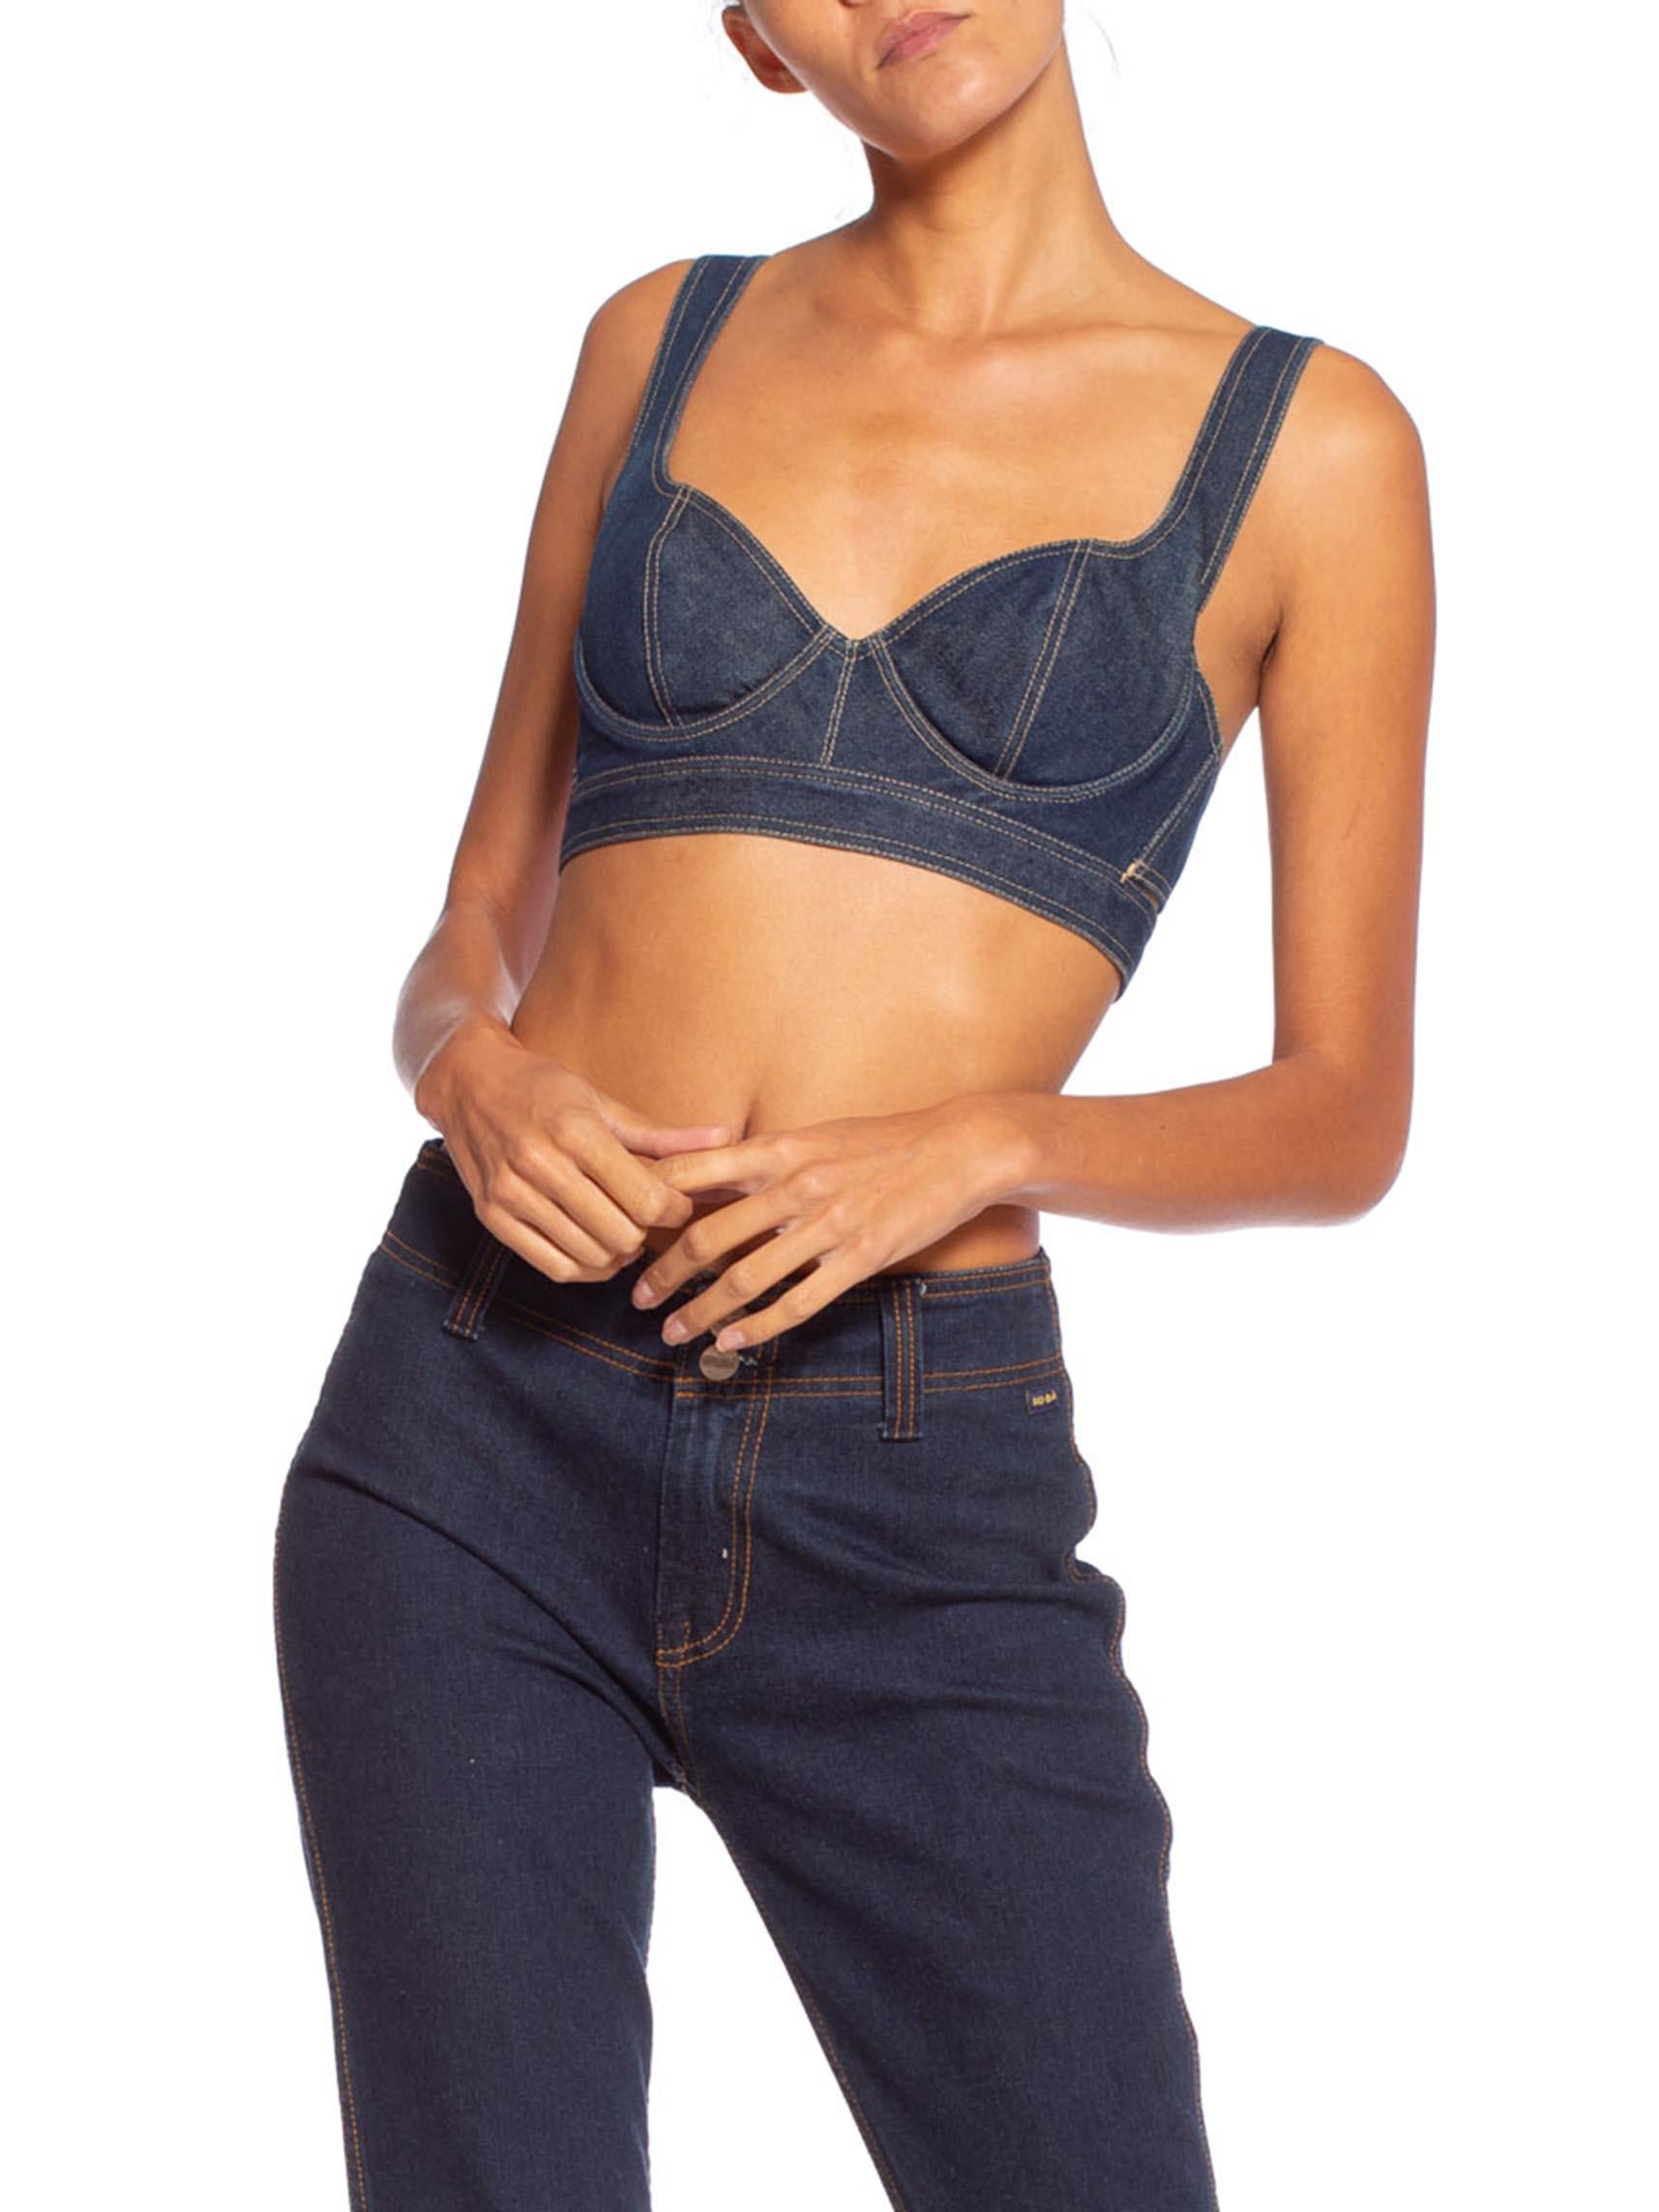 Rare Iconic 1980'S Alai Denim Jean Bra Top In Excellent Condition In New York, NY